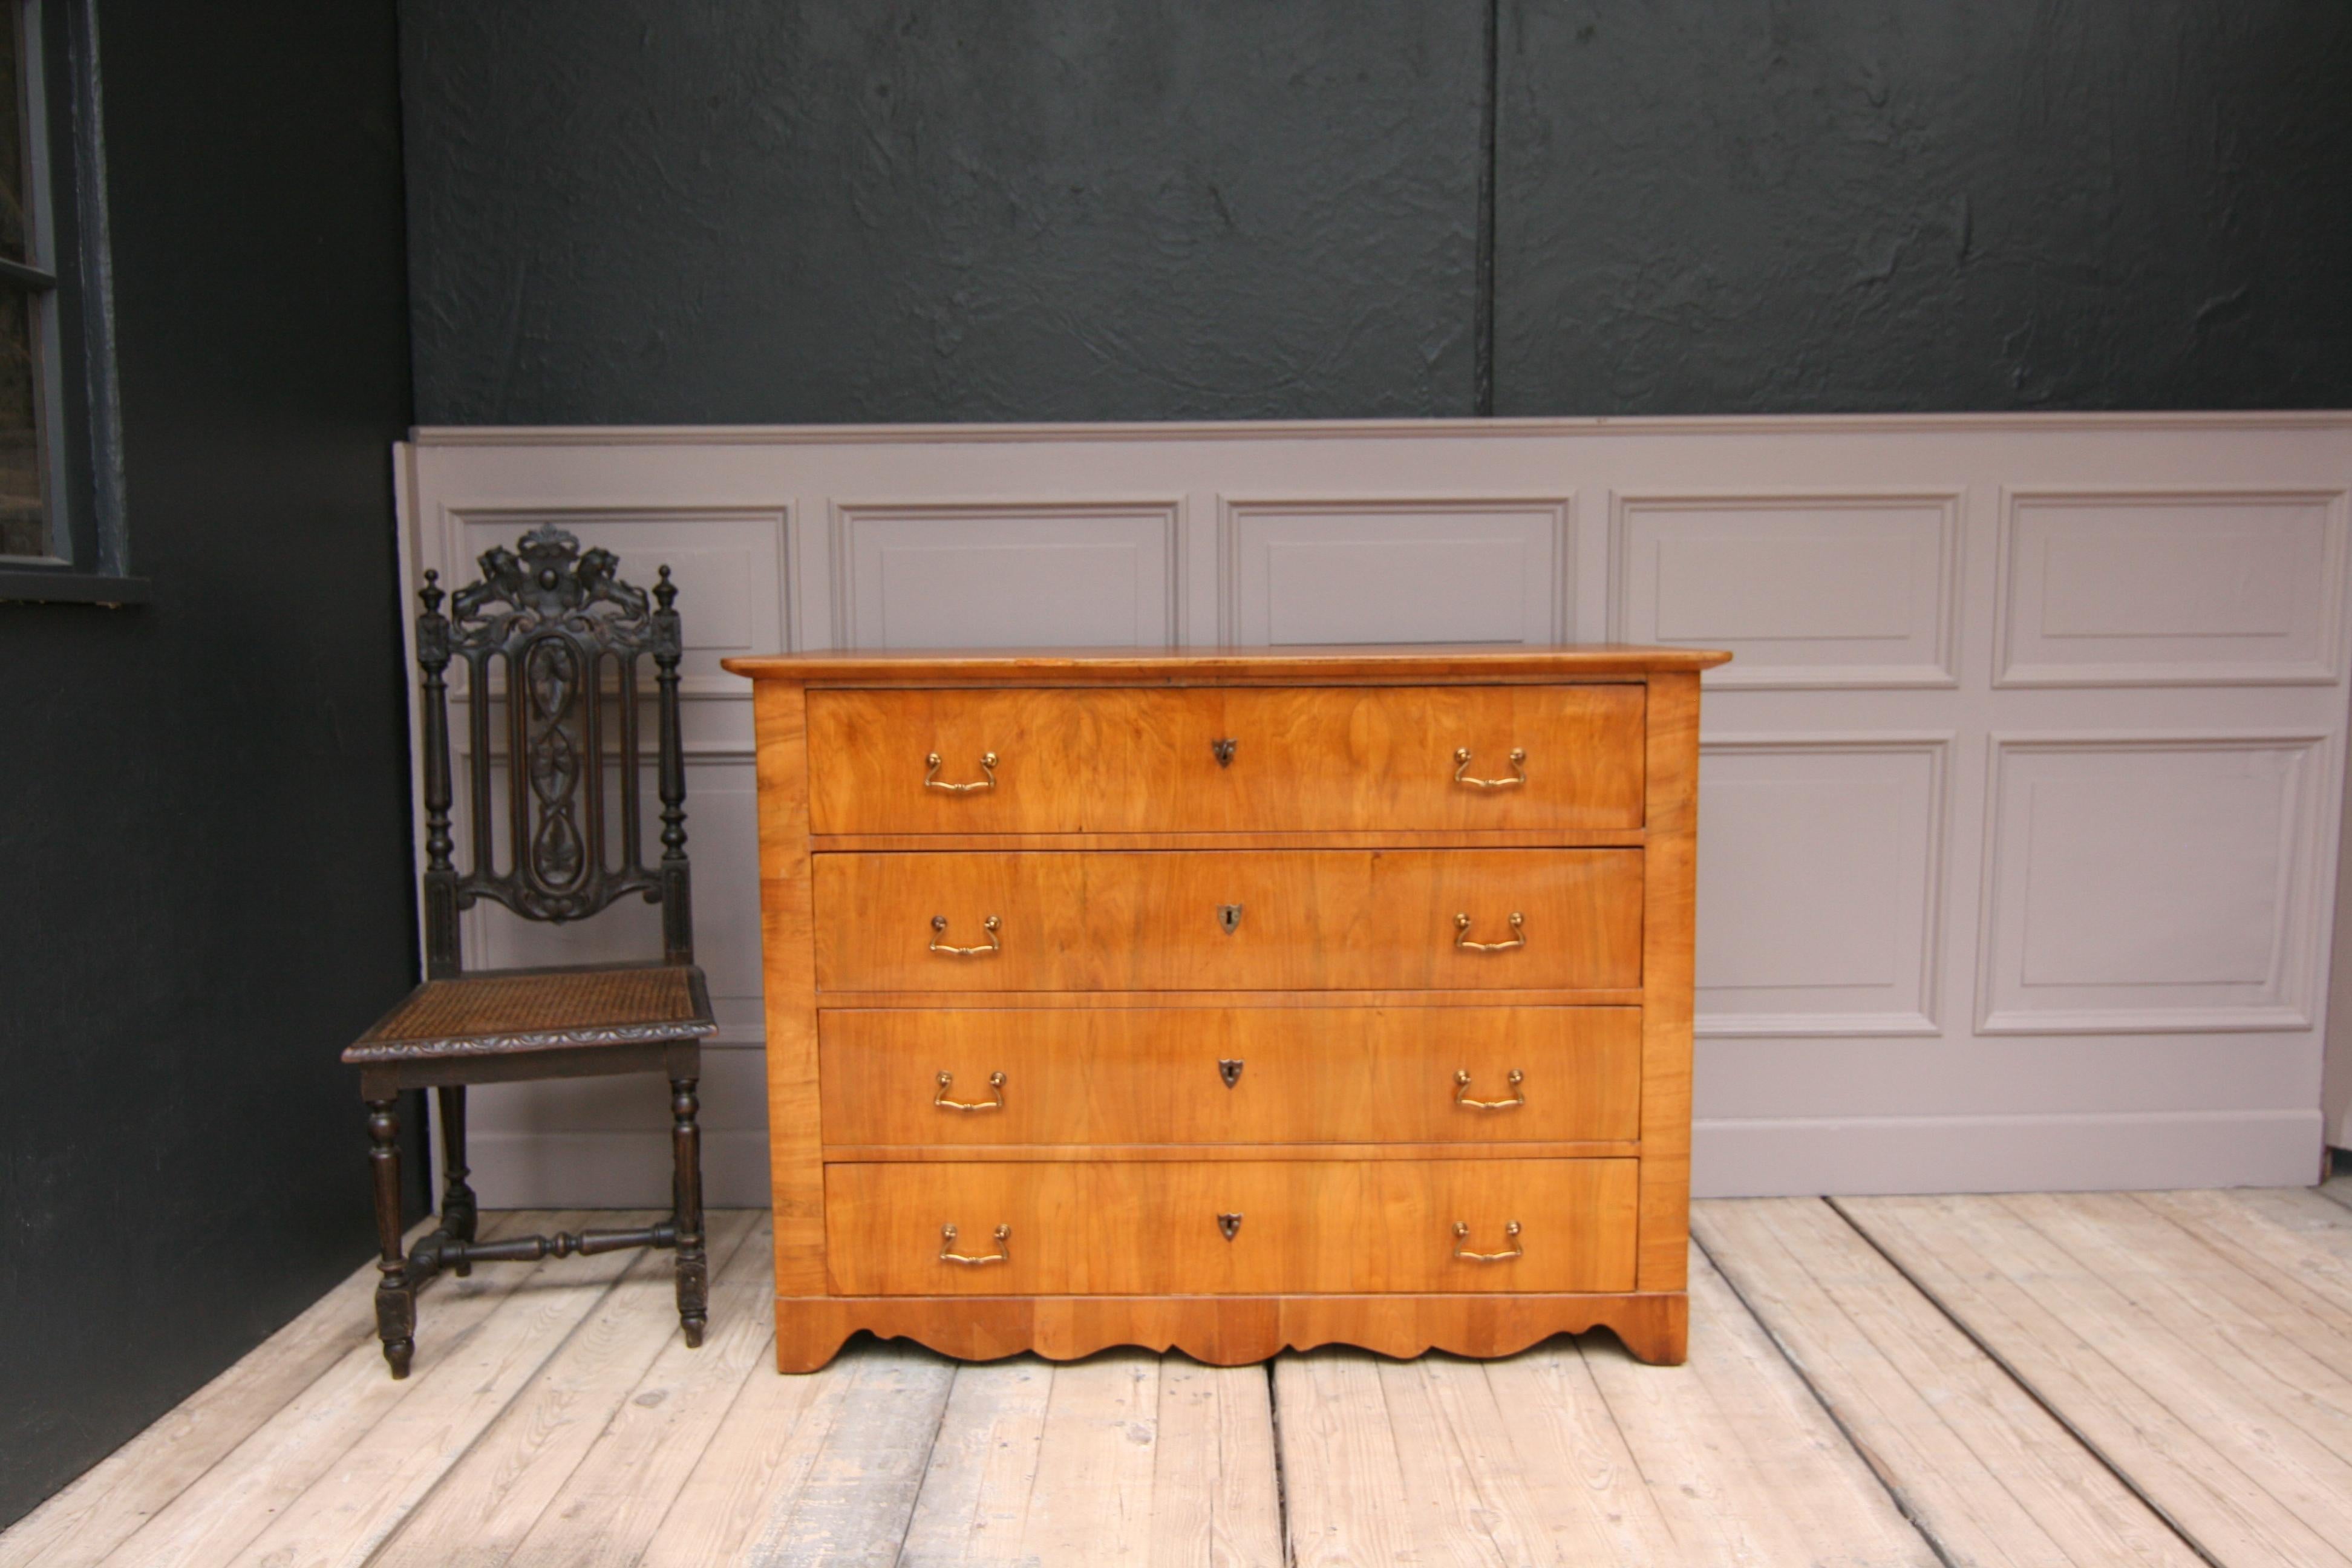 Biedermeier chest of drawers from southern Germany, circa 1850.

Dimensions: 
94 cm high / 37 inch high,
127 cm wide / 50 inch wide, 
63 cm deep / 24.8 inch deep.